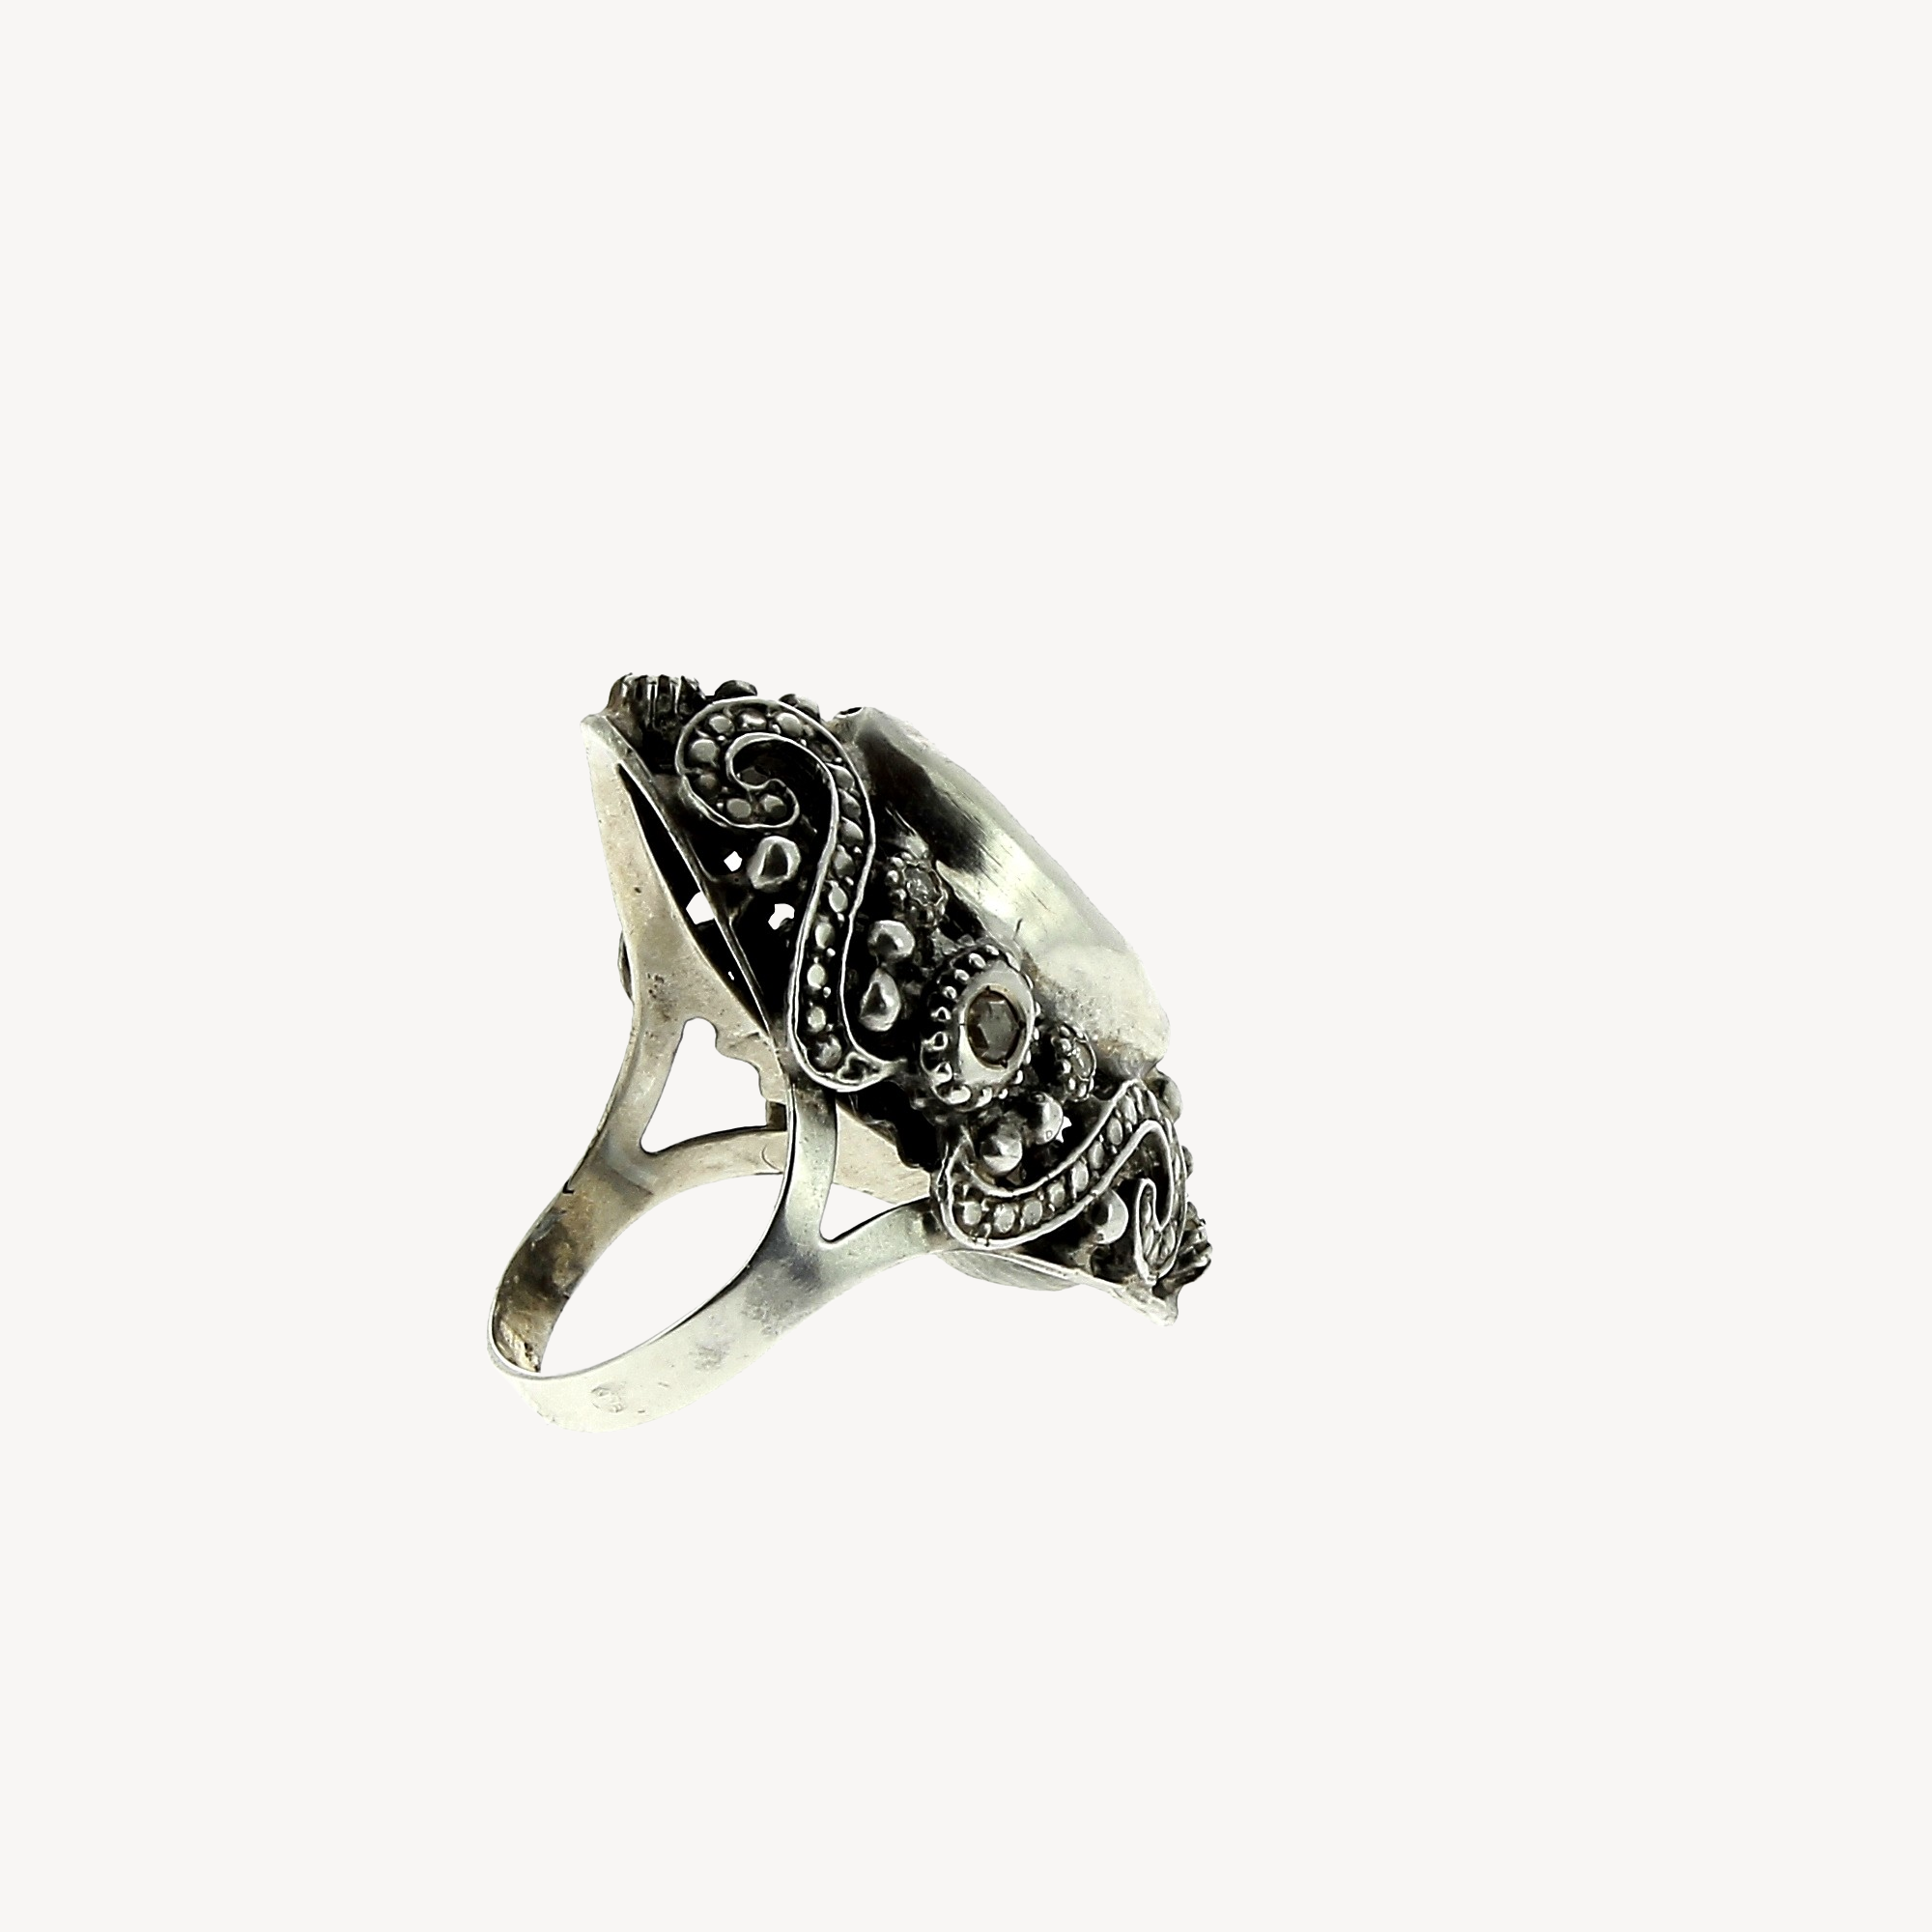 Mariach ring with diamonds